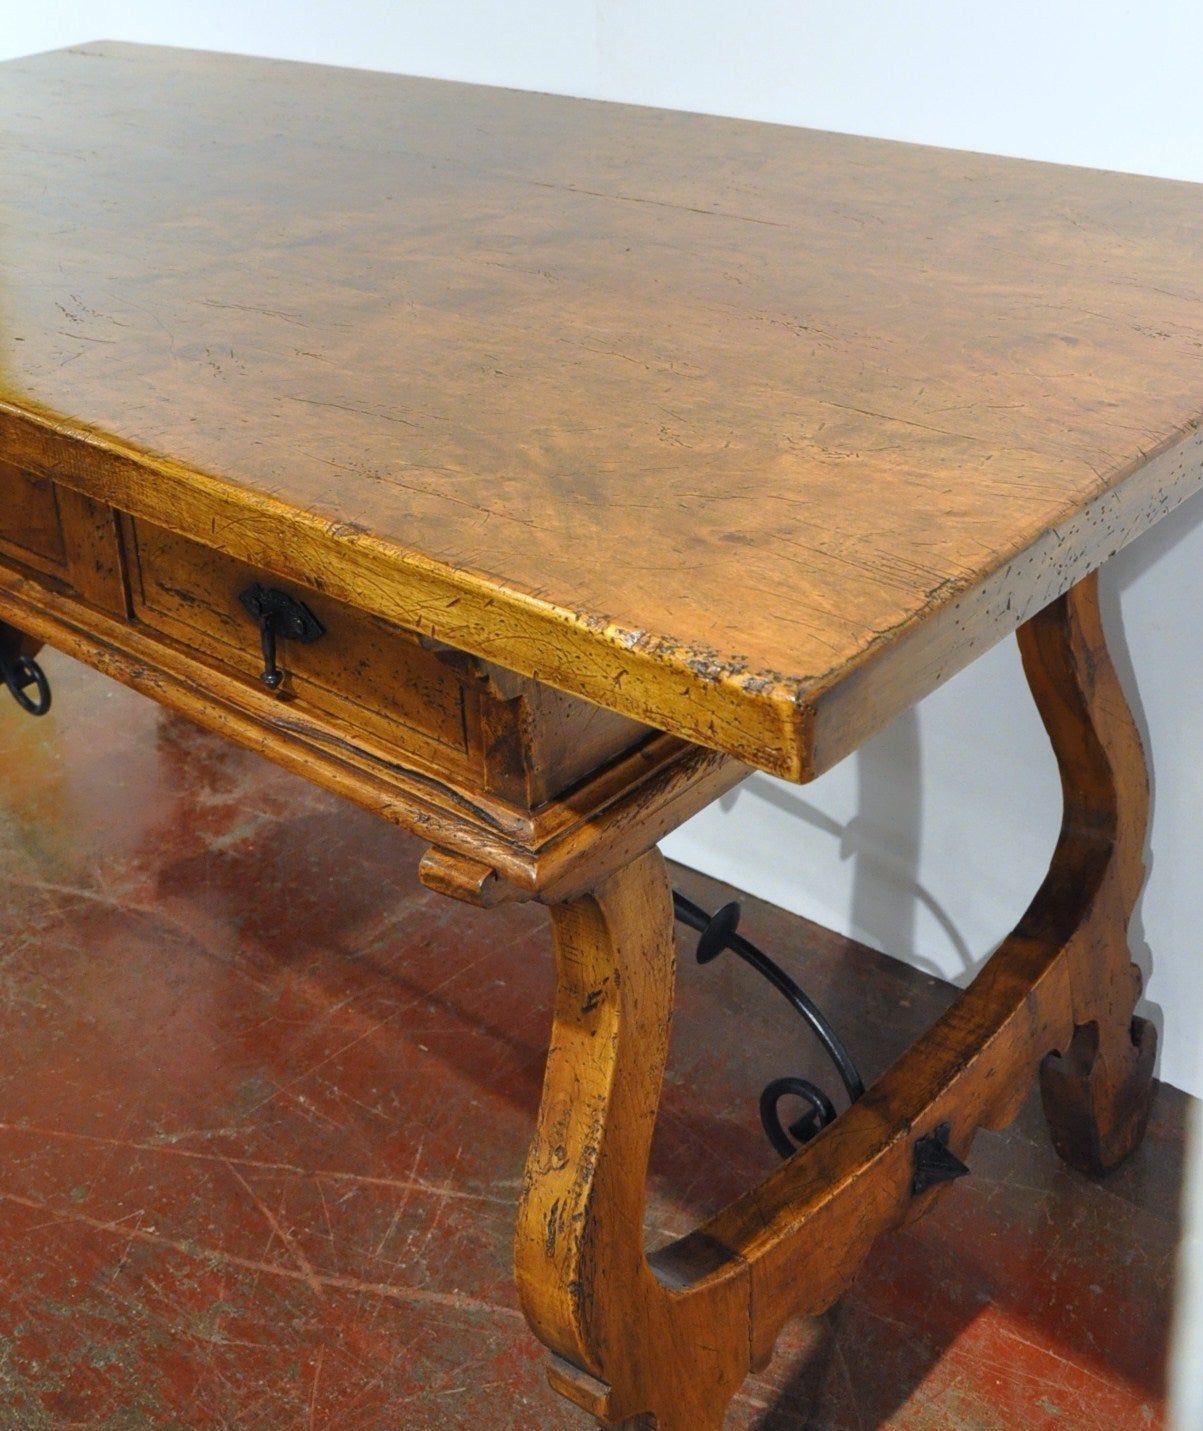 20th Century Walnut Spanish Table Desk with Drawers